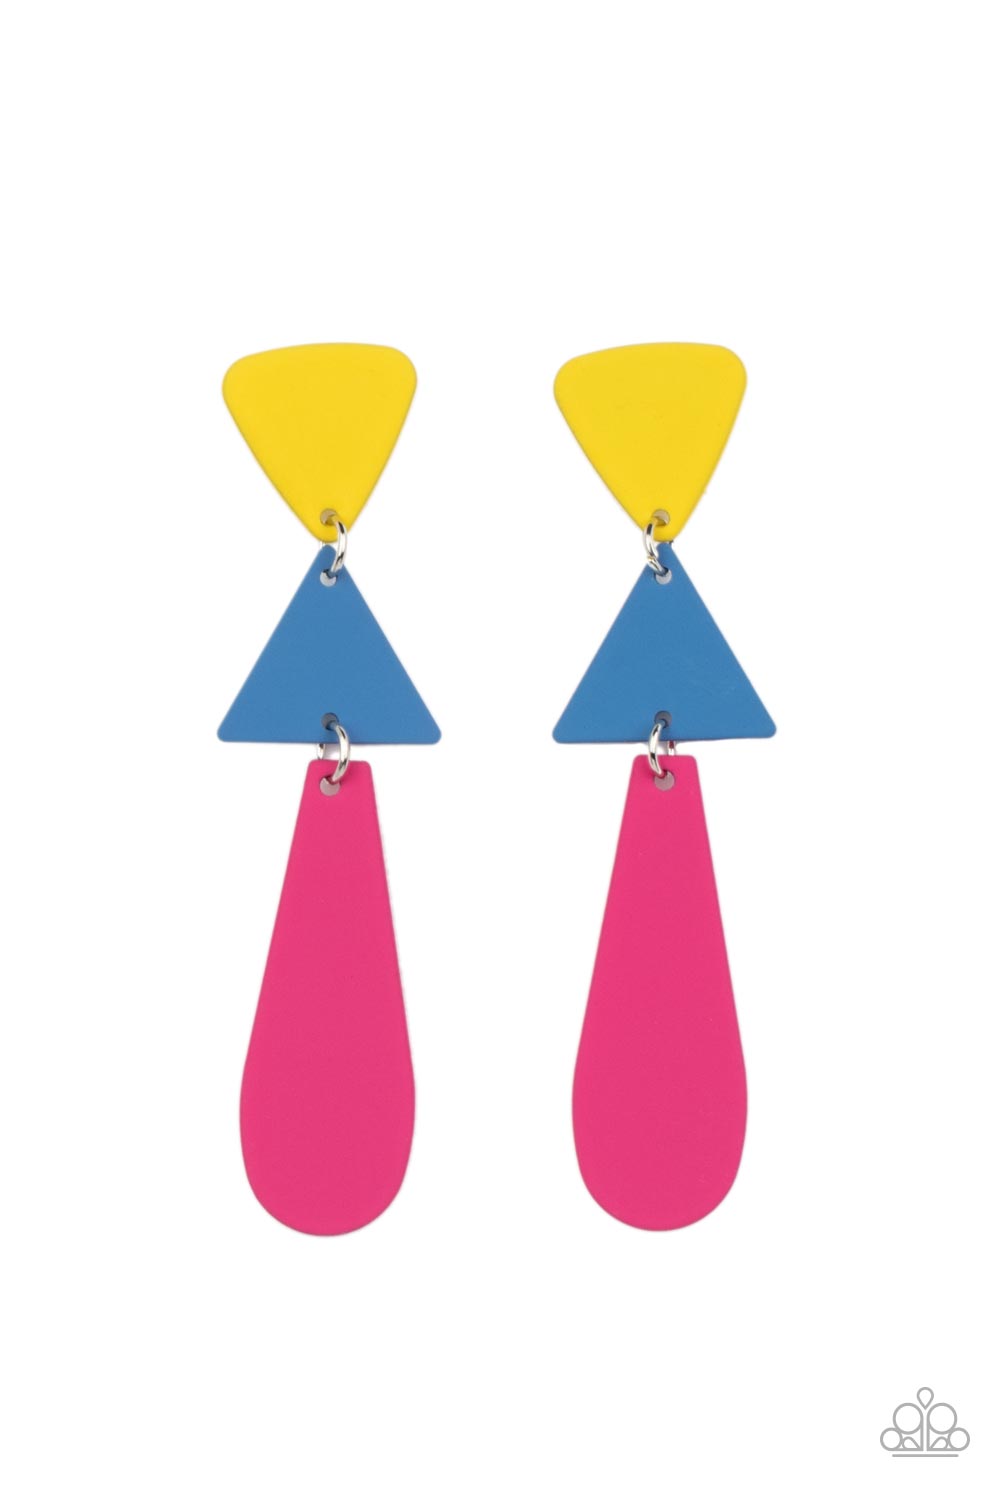 Retro Redux - Multi Matte Finish Earrings featuring a flat matte finish, an Illuminating triangle, a French Blue triangle, and an oval Fuchsia Fedora frame delicately links into a colorfully retro lure. Earring attaches to a standard post fitting.  Sold as one pair of post earrings.